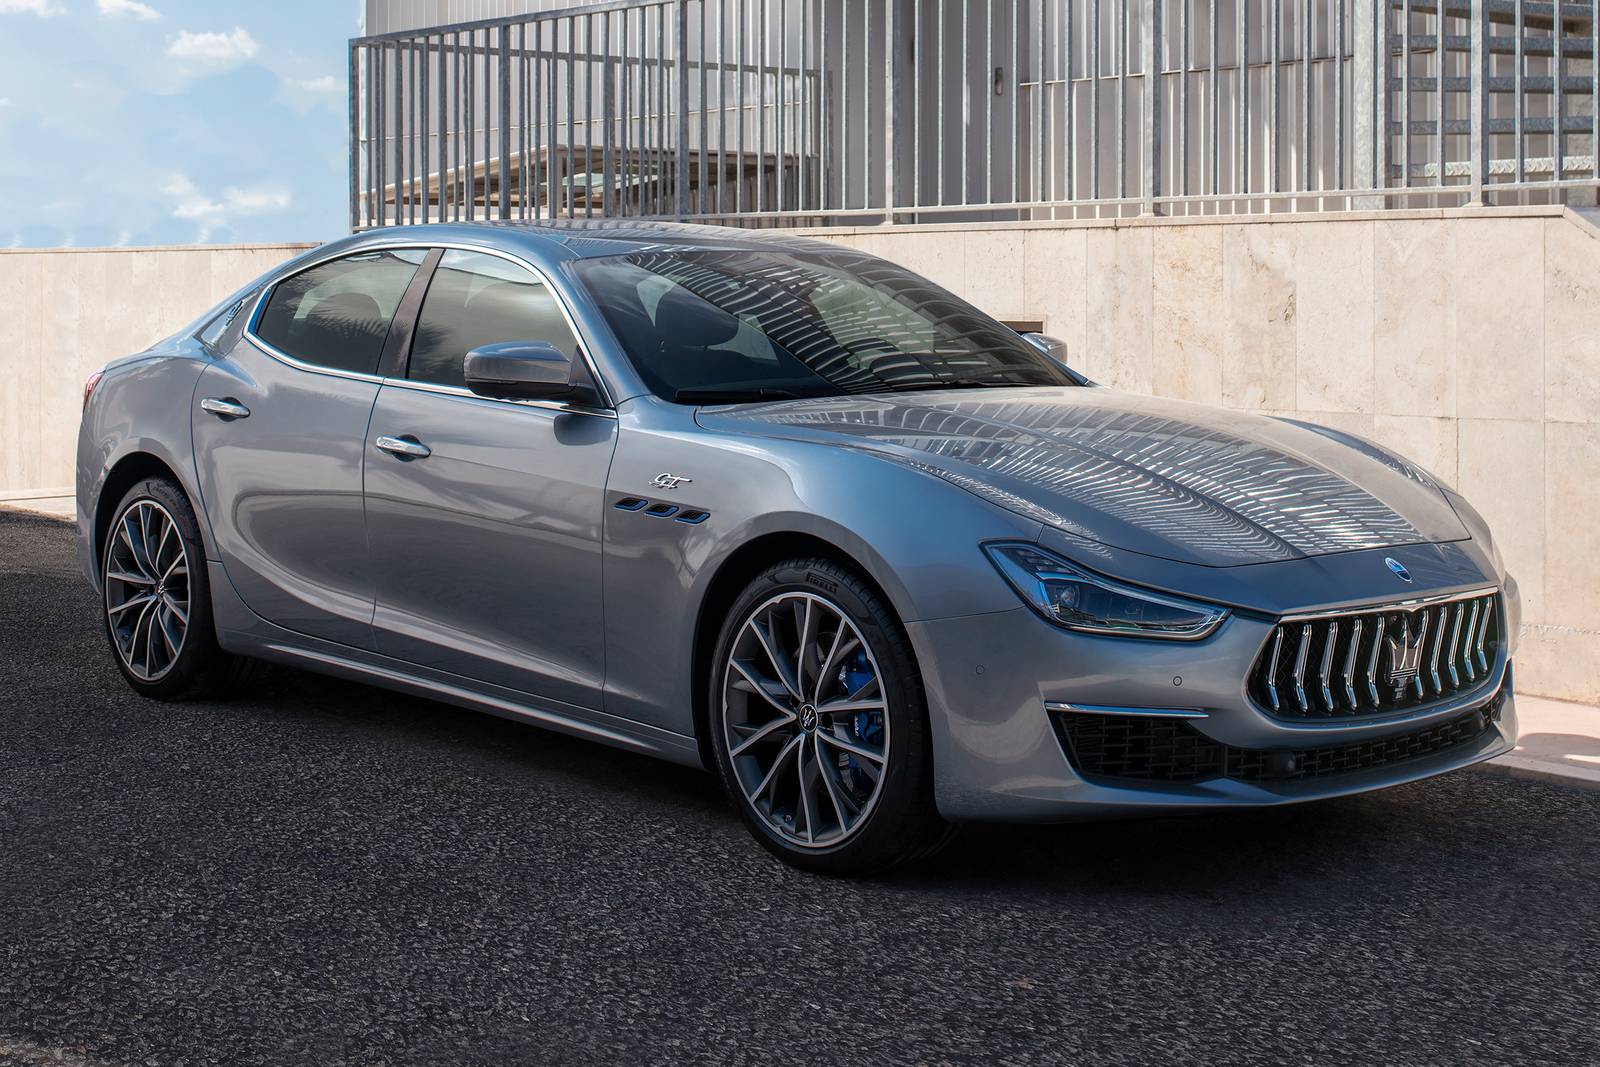 Communist region hell 2022 Maserati Ghibli Prices, Reviews, and Pictures | Edmunds